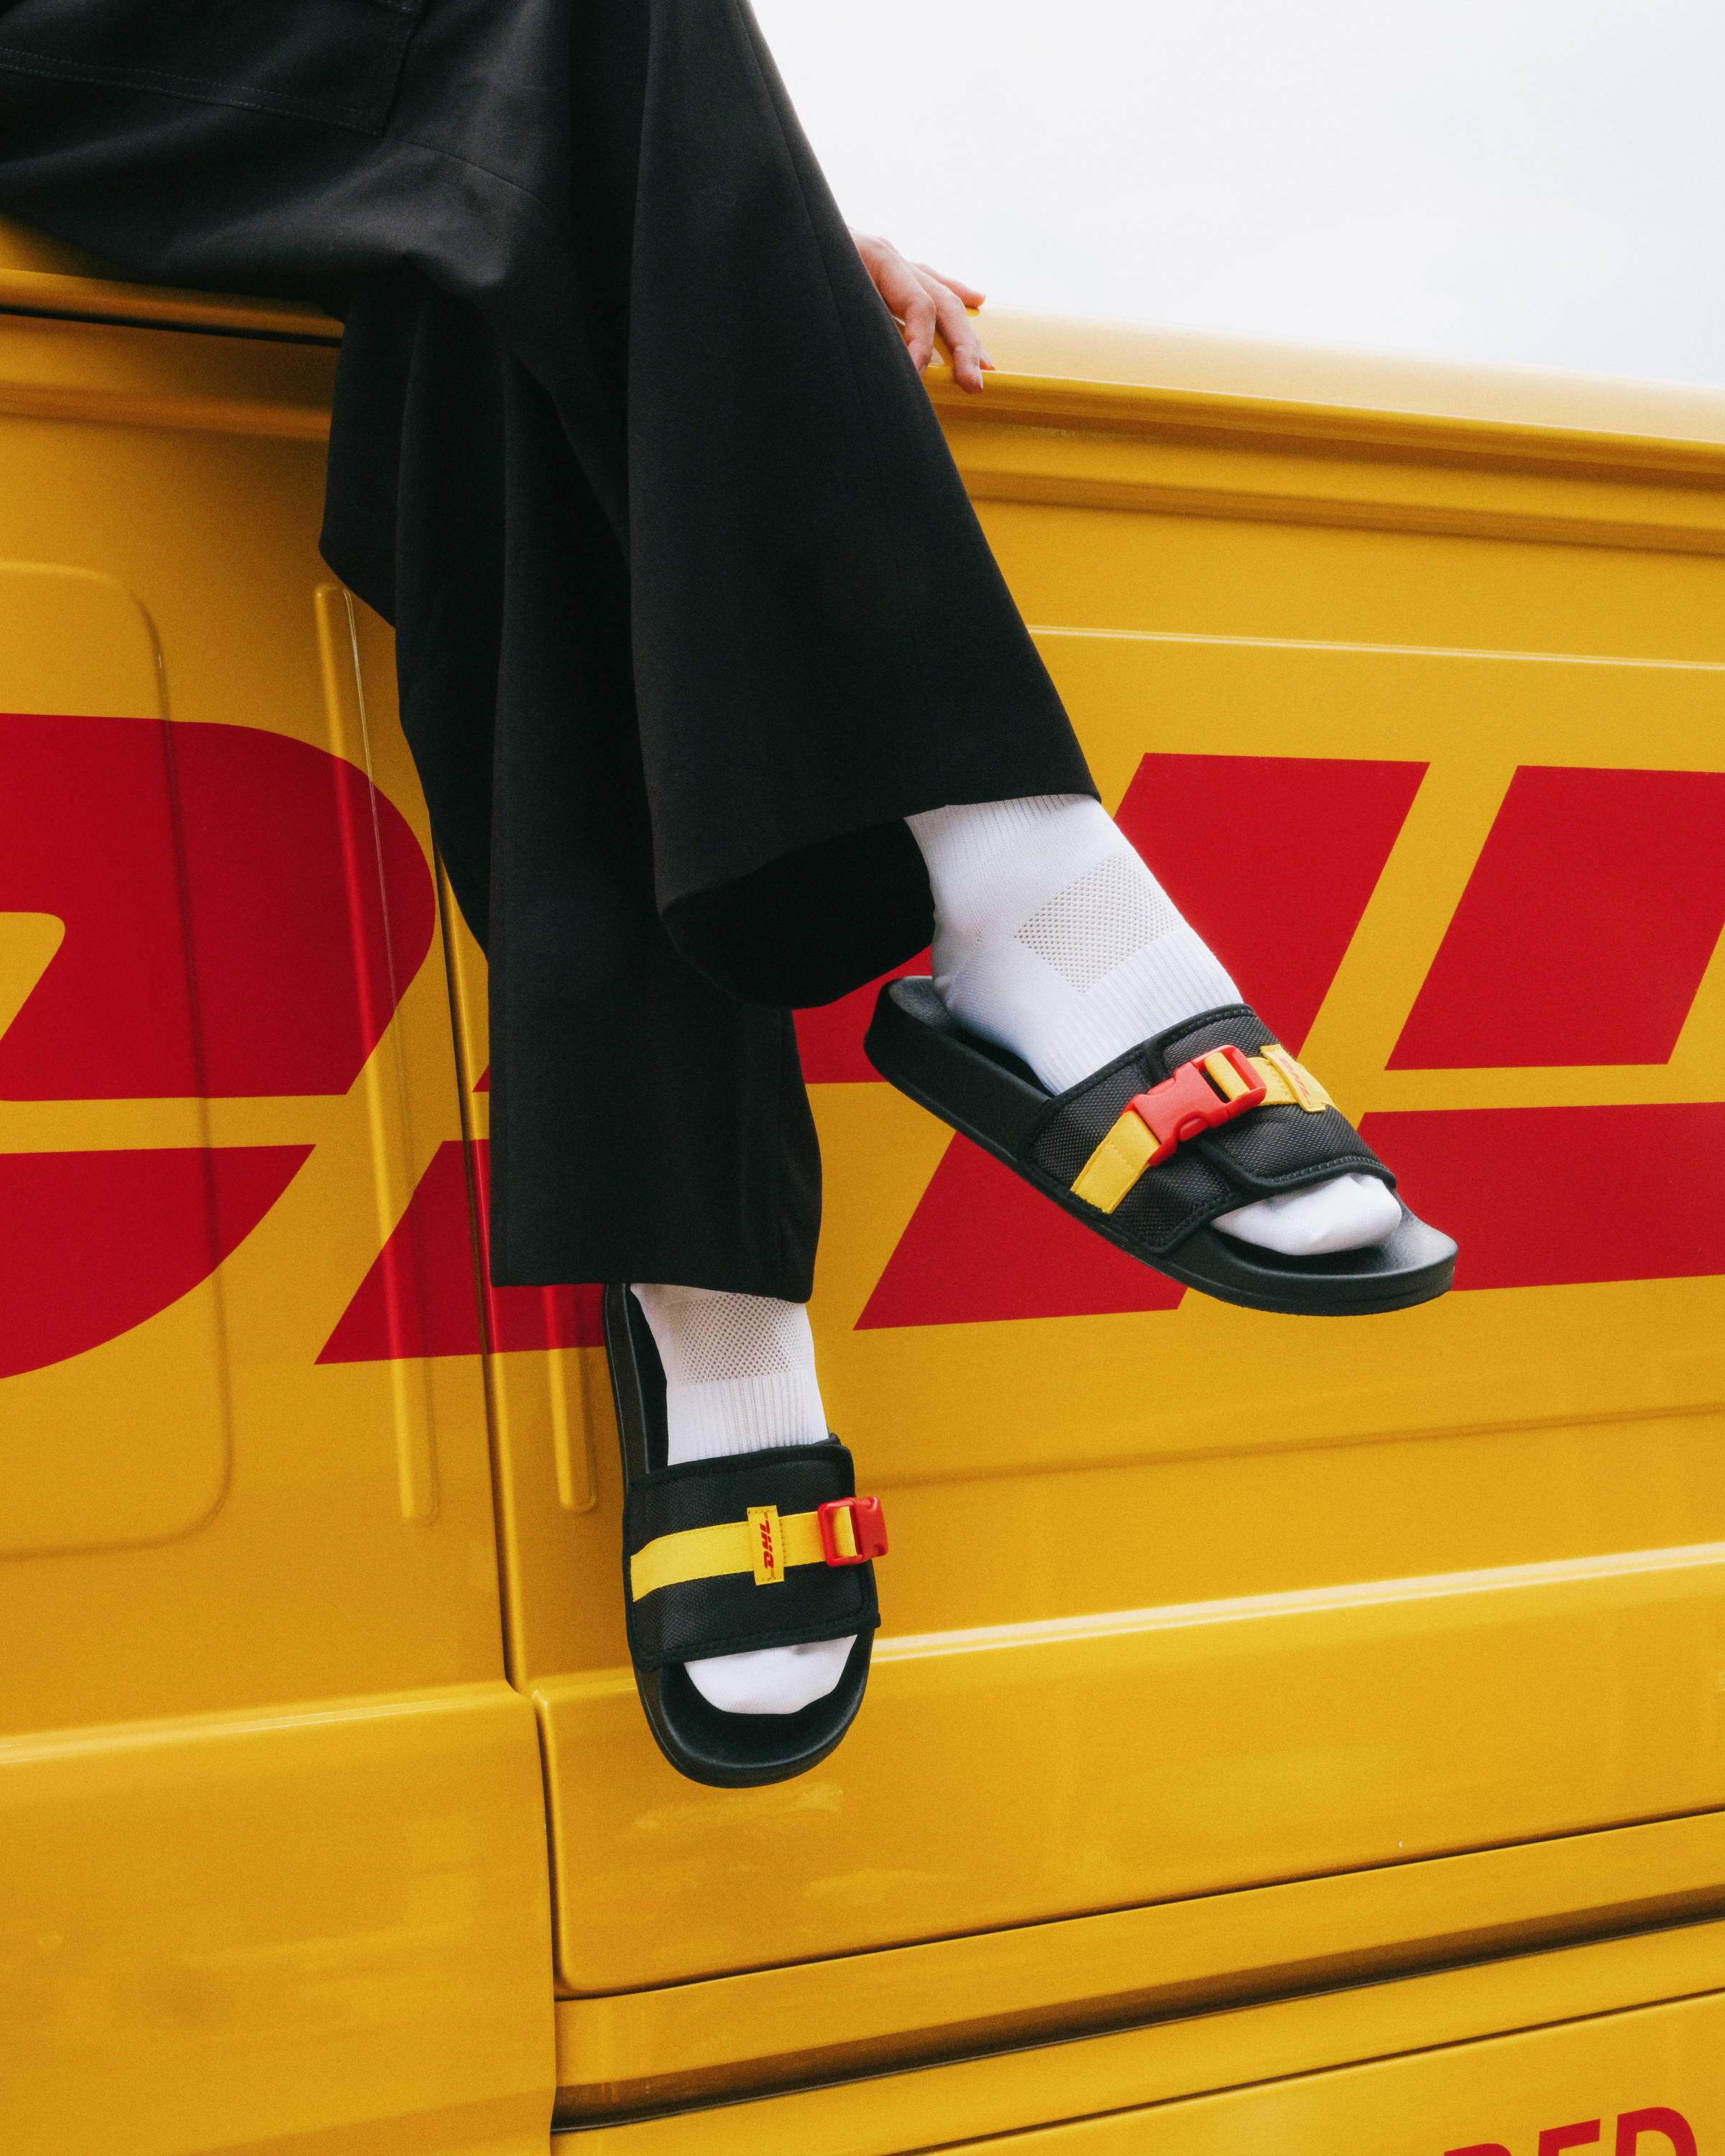 DHL & fashion designer Christy Ng collaborate on inspiring collection